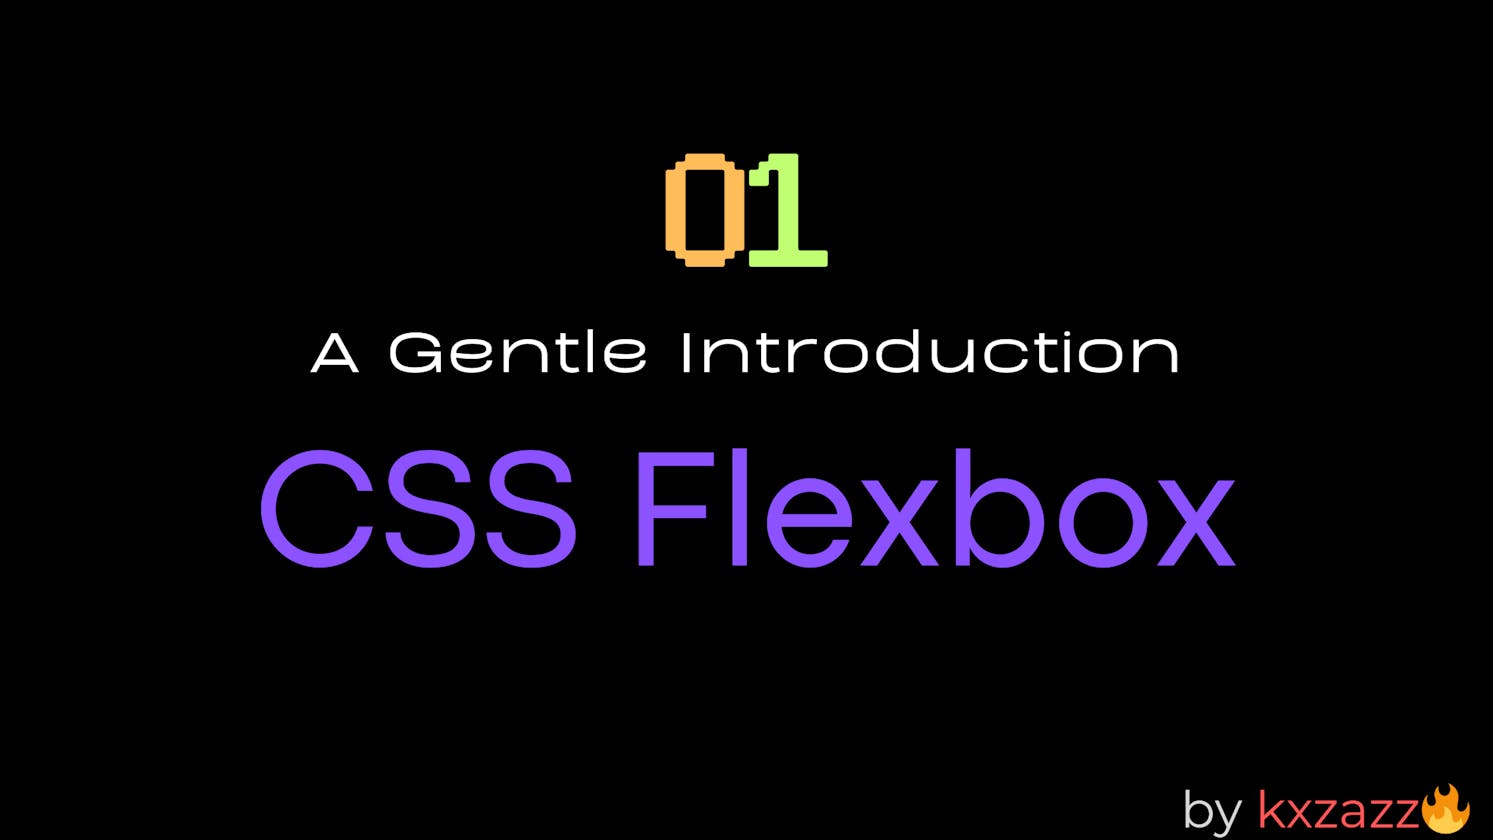 0 to 1: A Gentle introduction to CSS Flex box